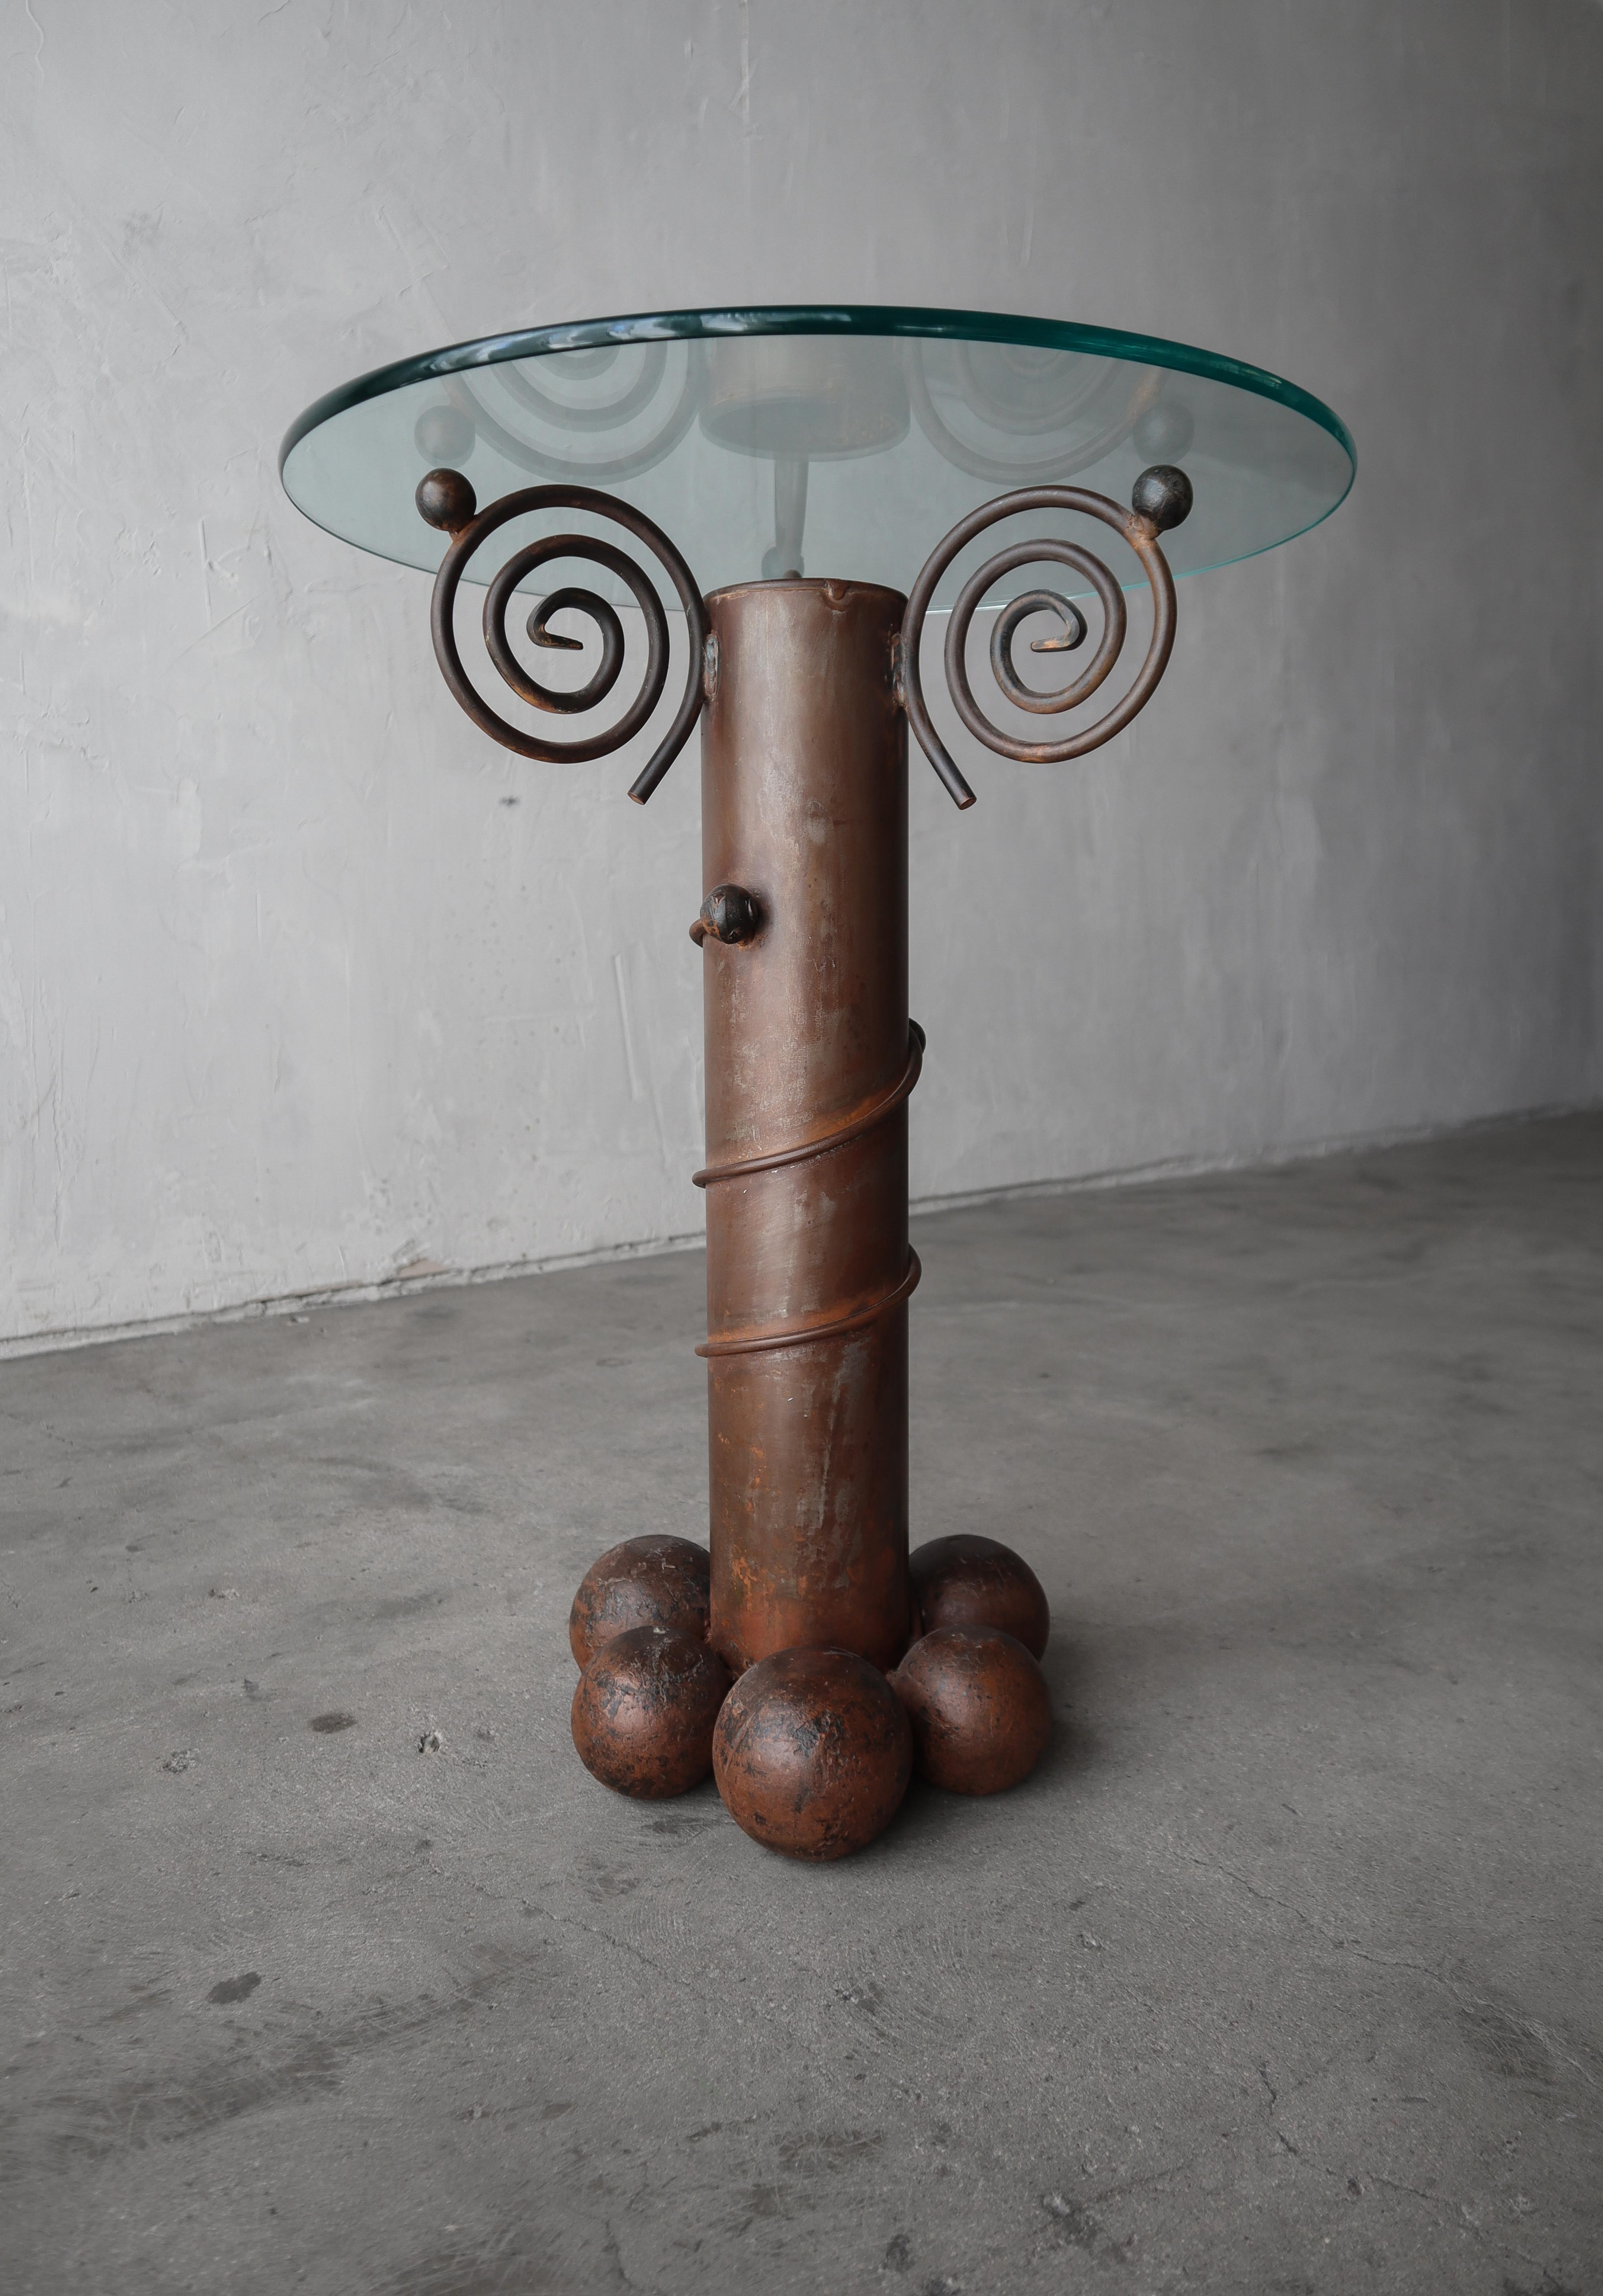 Unique, handmade side table by Carlos De Anda and made is Mexico. The table base is constructed of forged iron with center column design supported by large, solid iron ball feet and scroll details that support a glass top. Very artistic piece. All